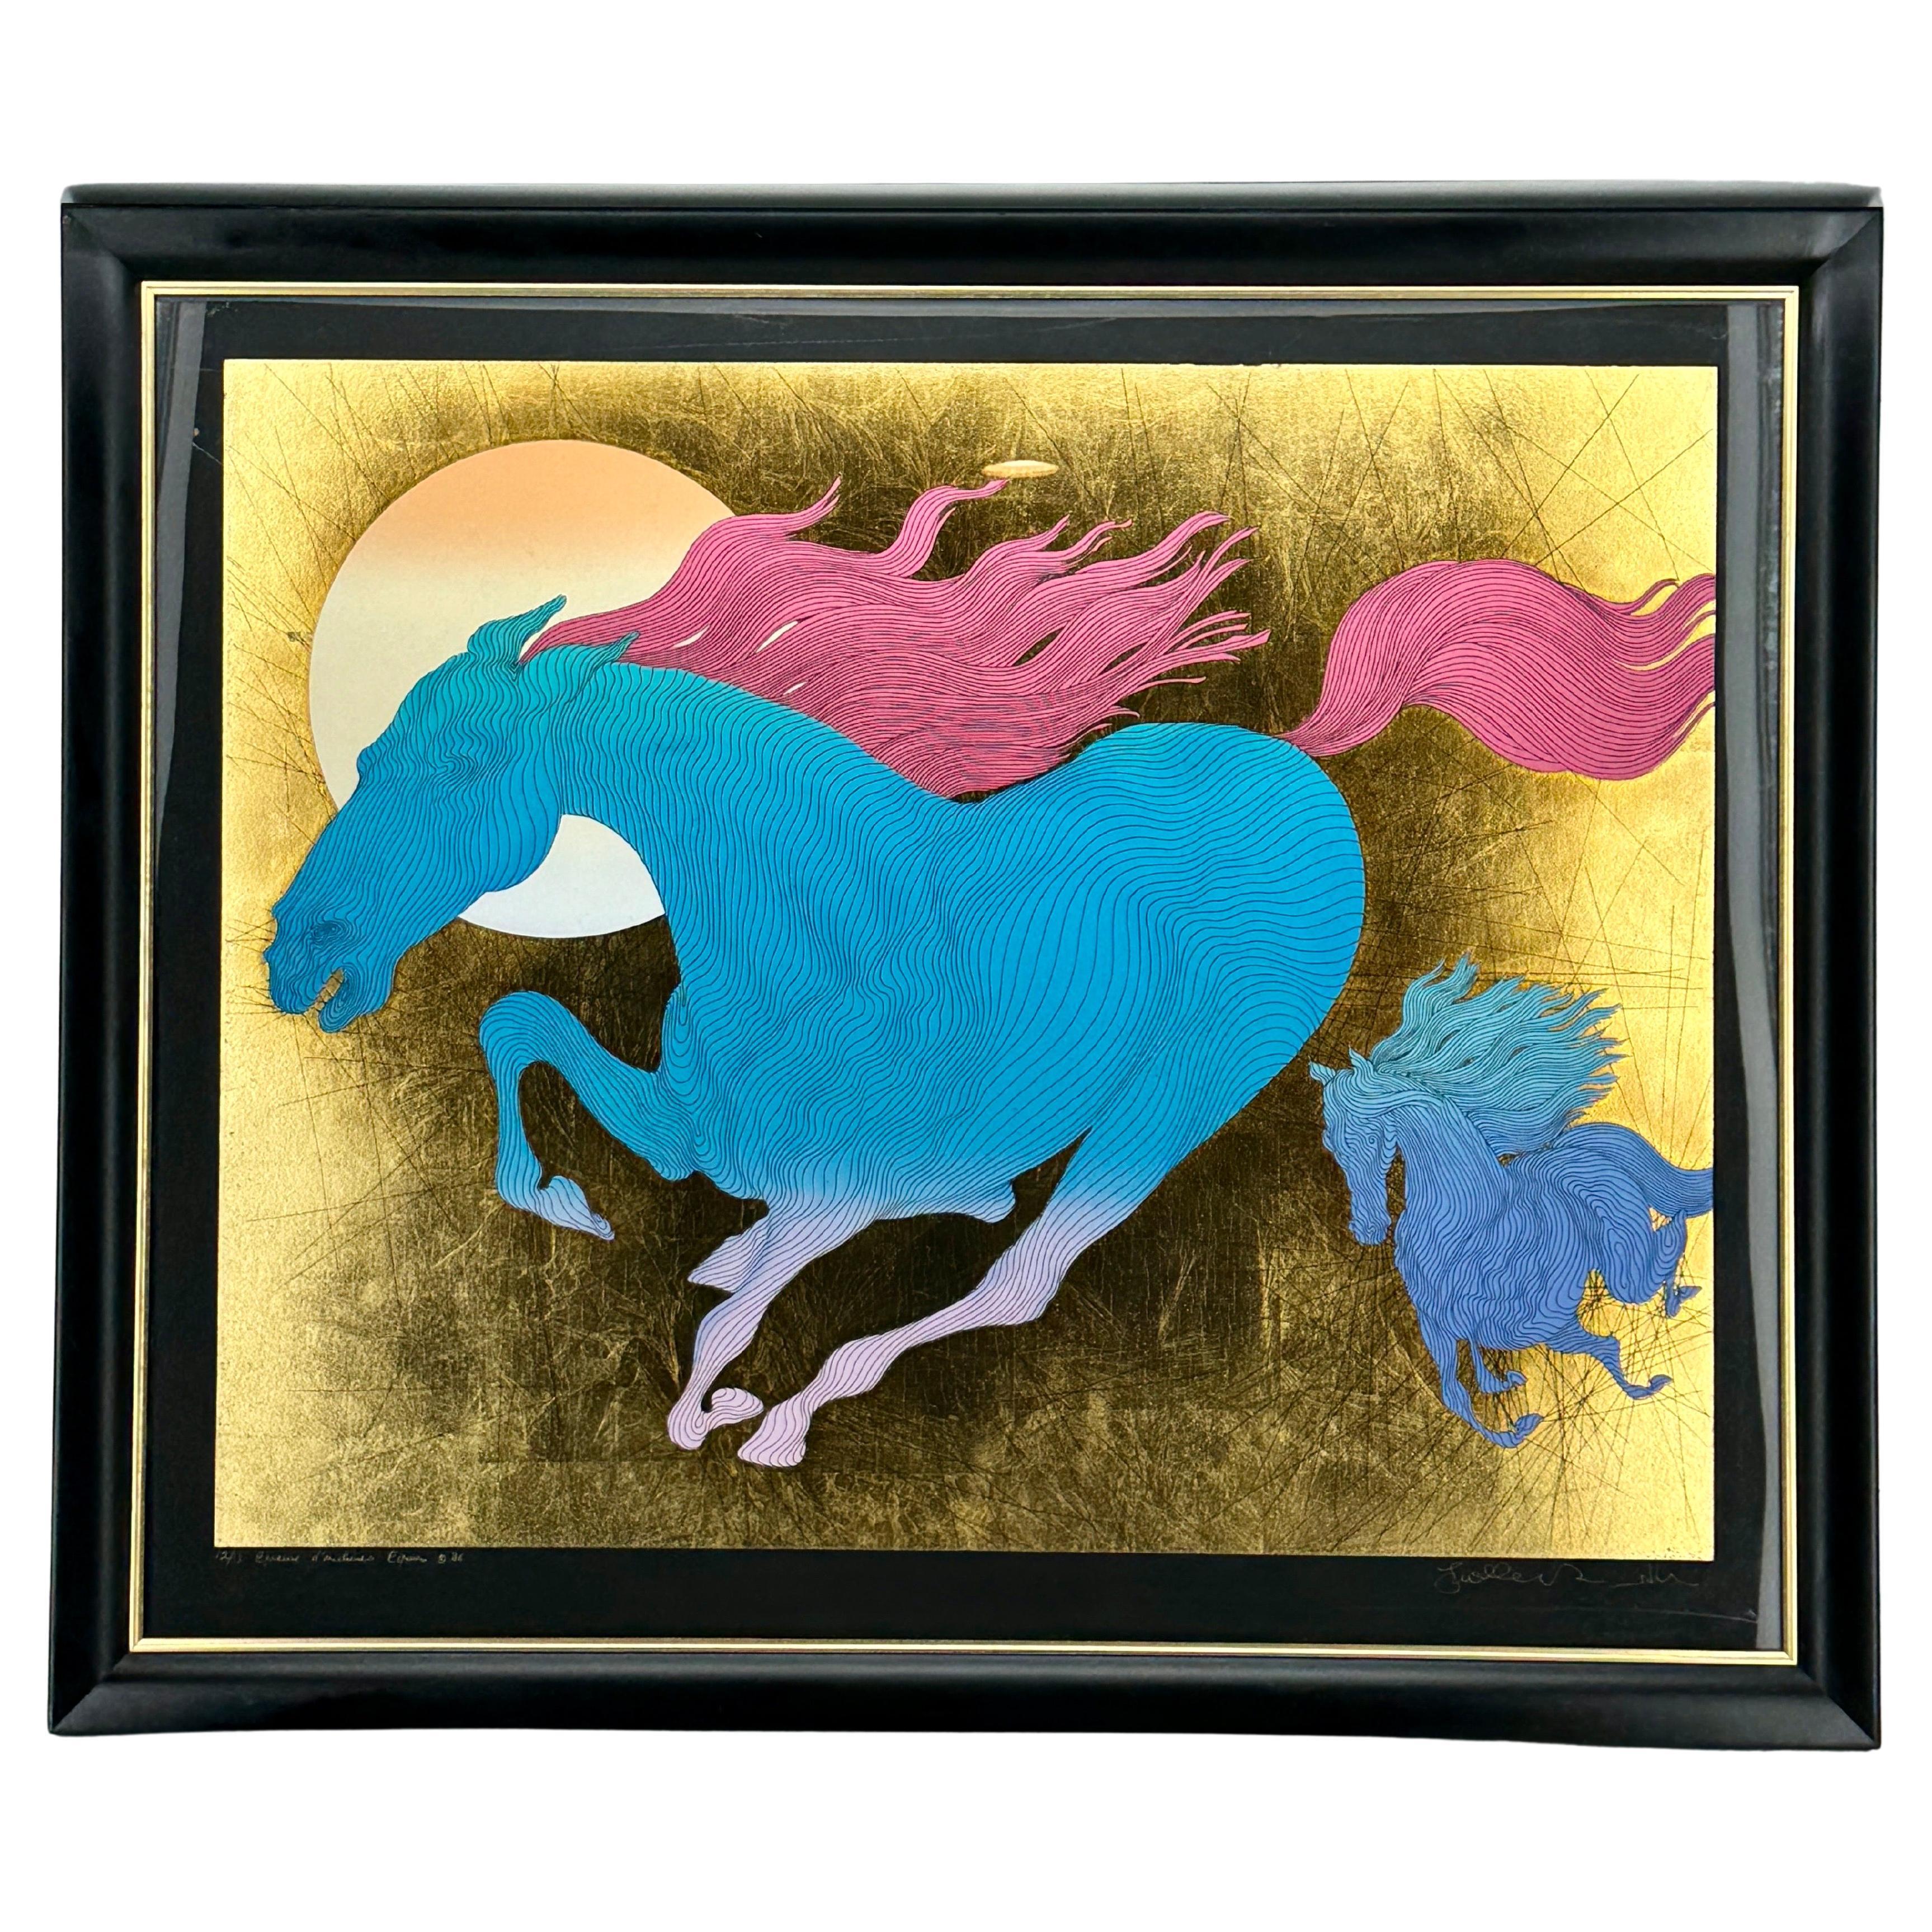 Guillaume Azoulay Equus Gold Leaf Running Horse Serigraph Limited Edition 12/12 For Sale